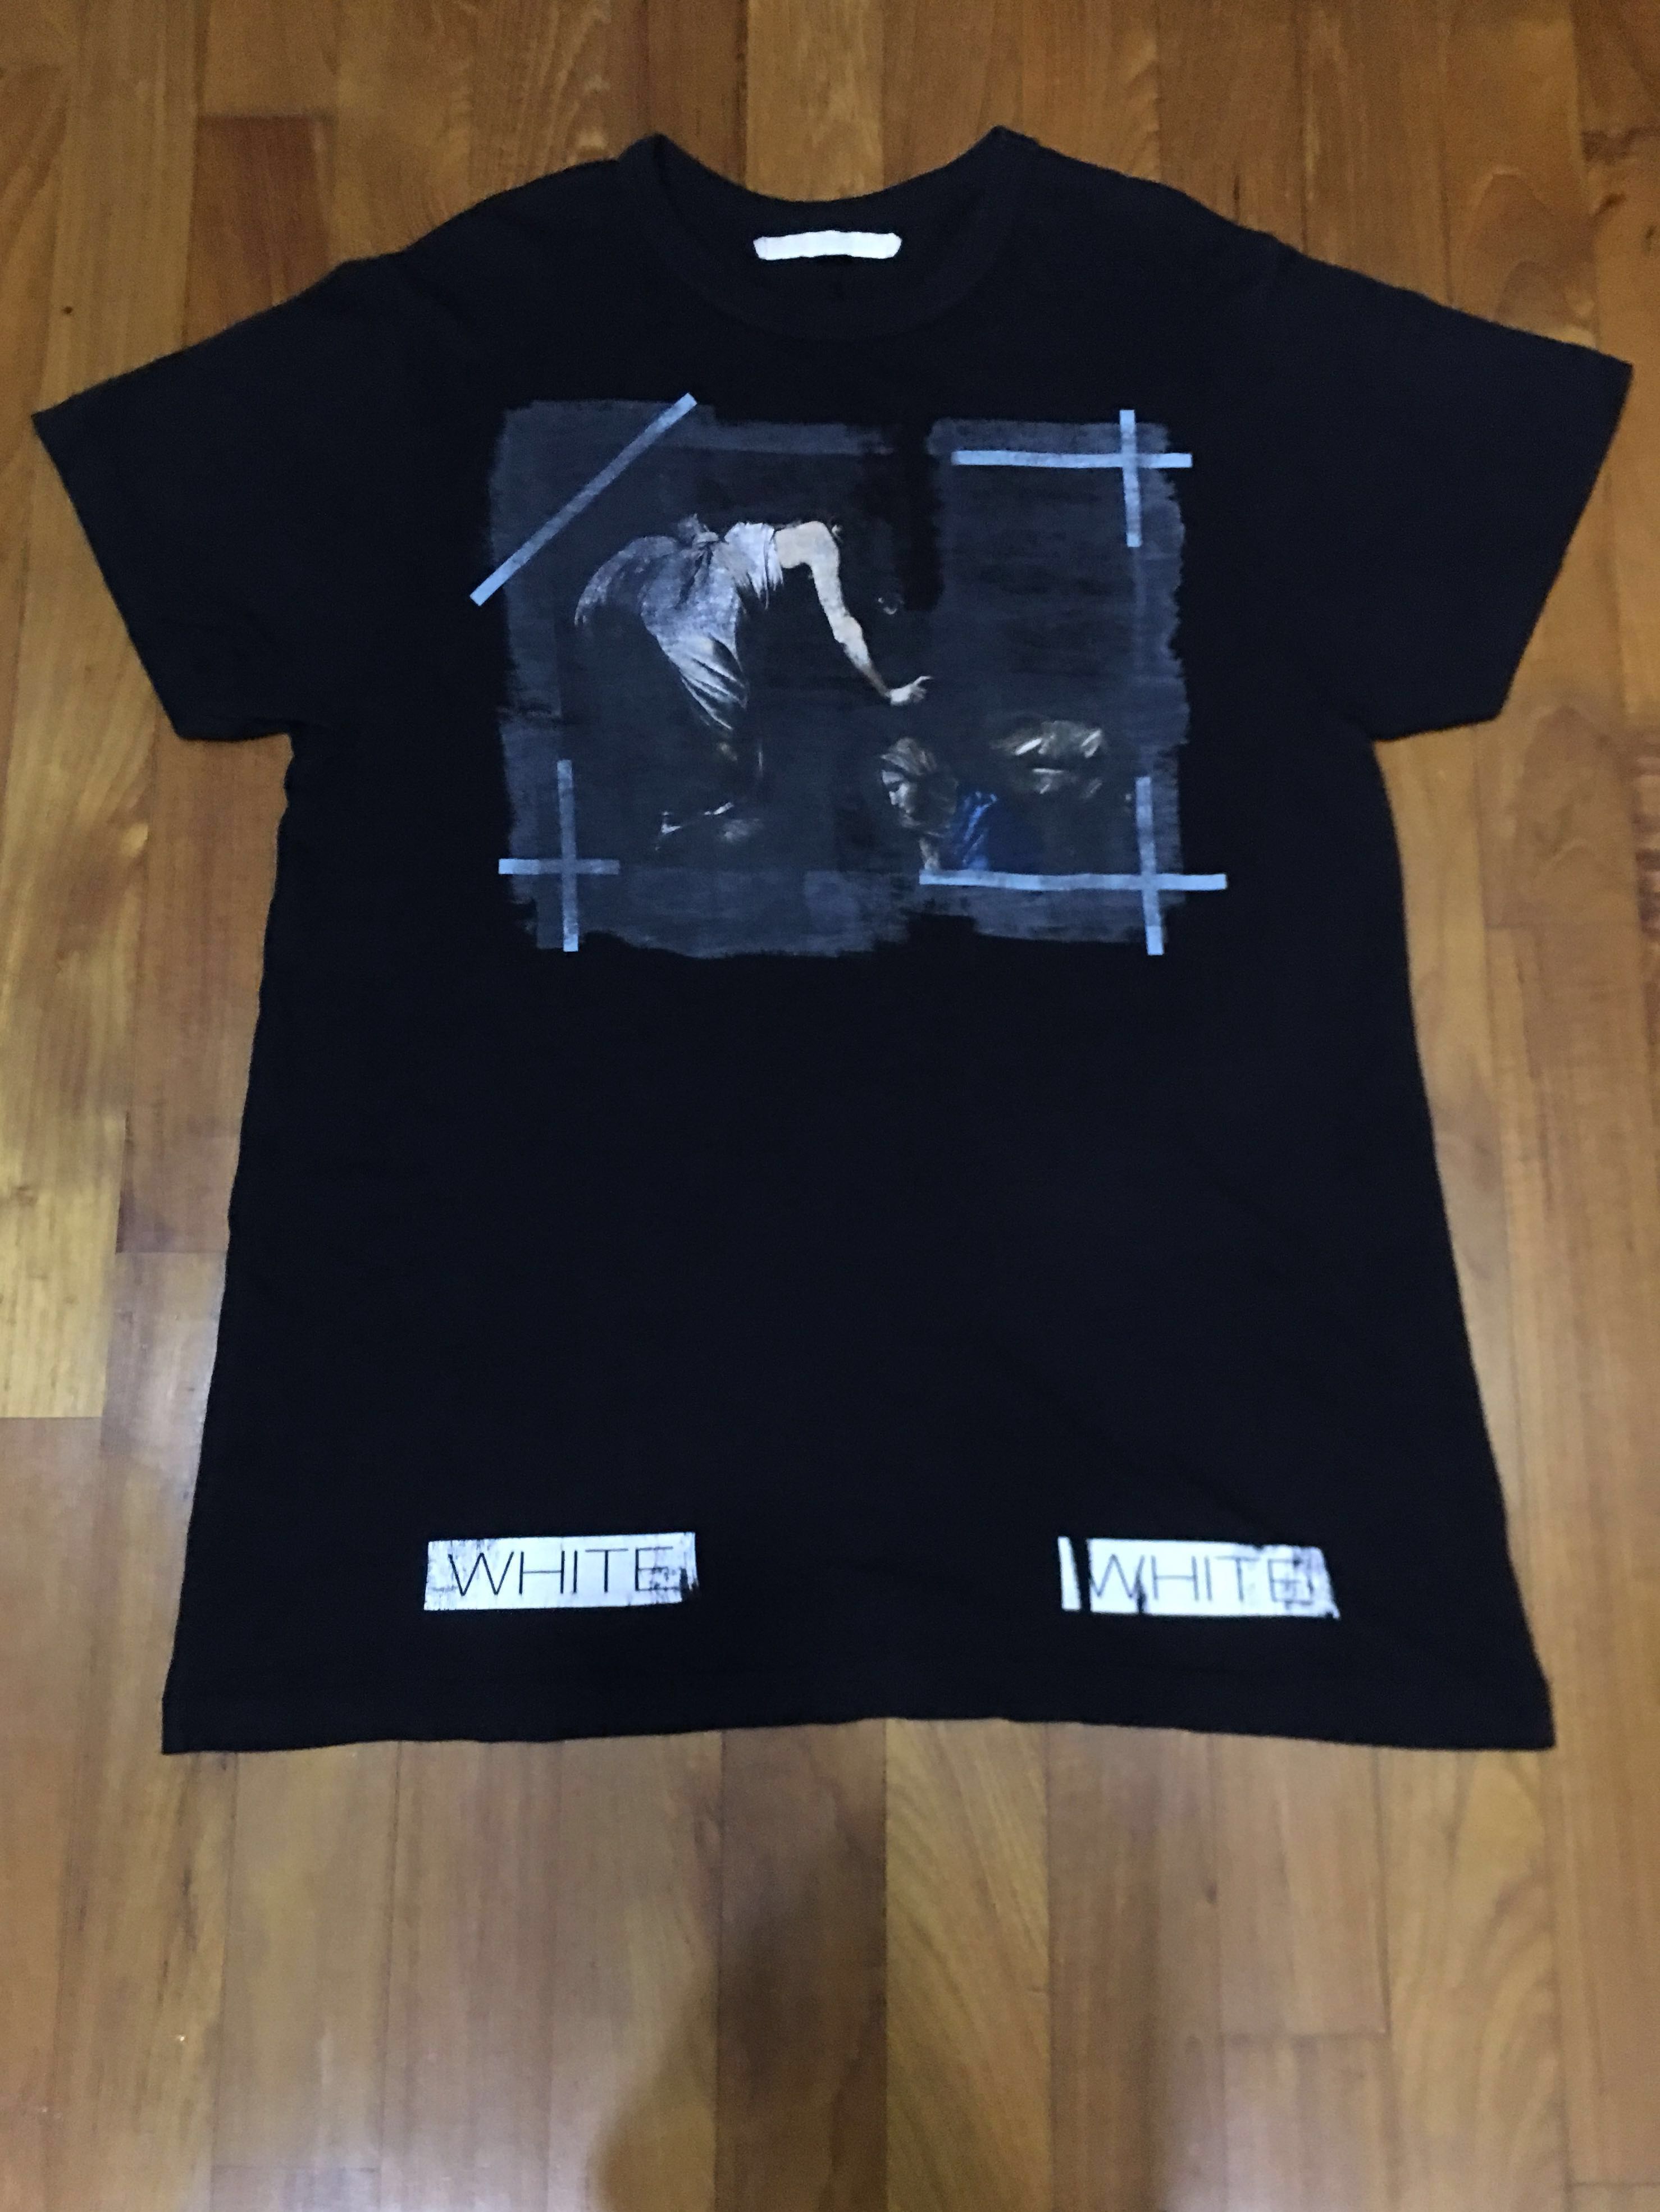 indlysende komplikationer indtryk WTT/WTS Off White Caravaggio Annunciation Tee FW16, Men's Fashion, Tops &  Sets, Hoodies on Carousell